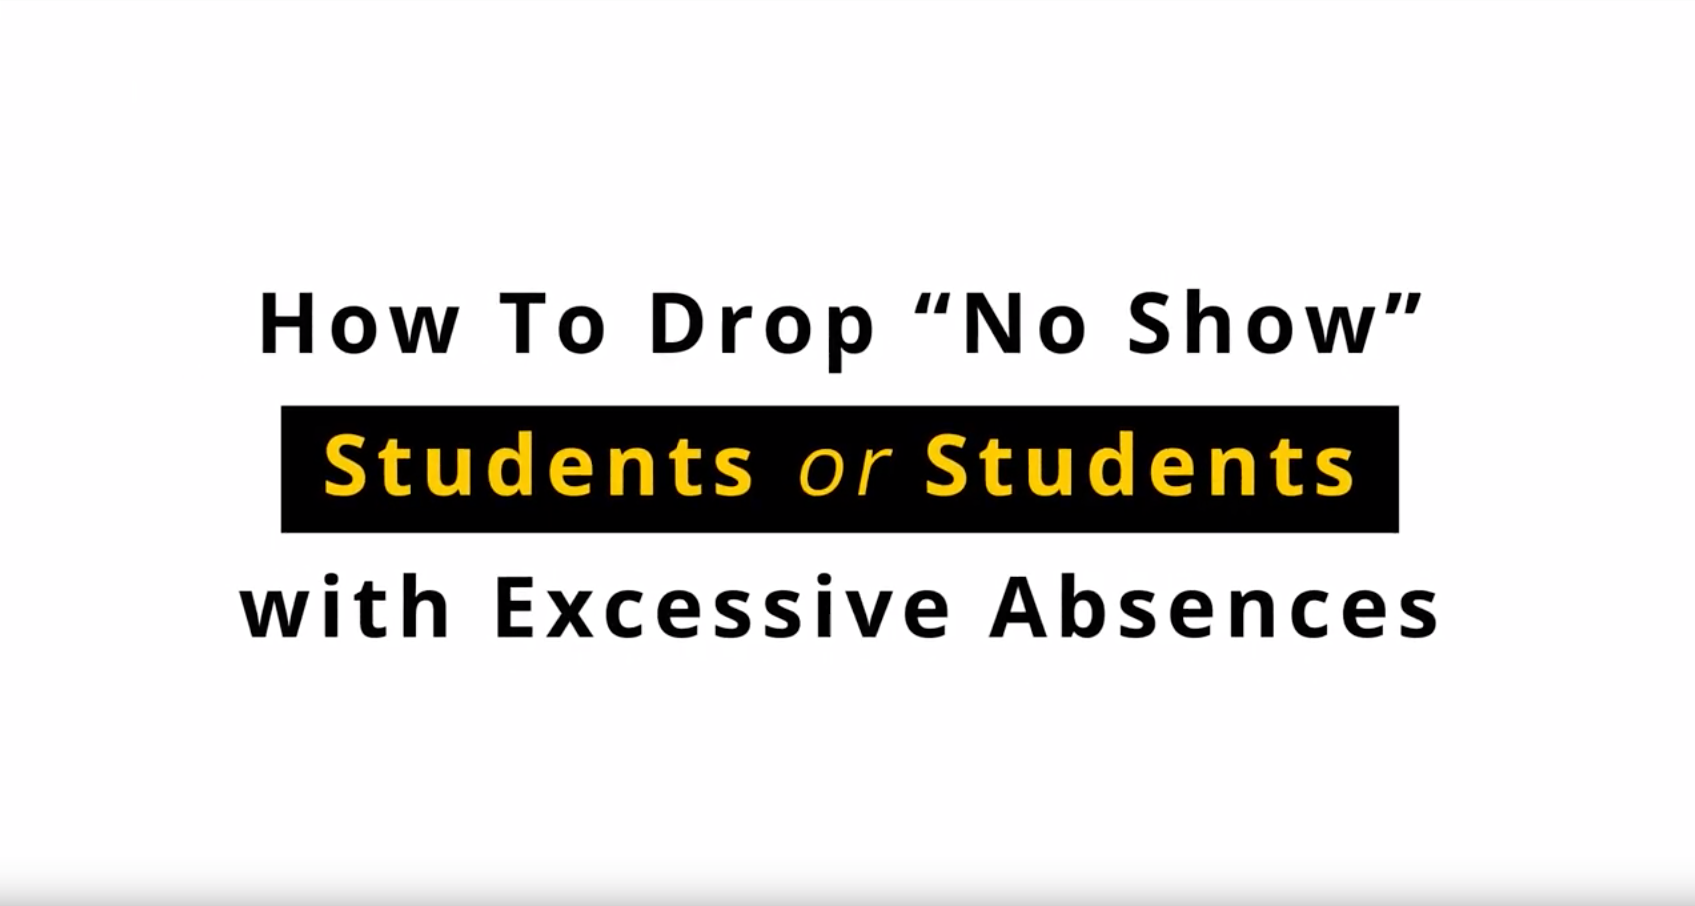 How to drop no-show students or students with excessive absences